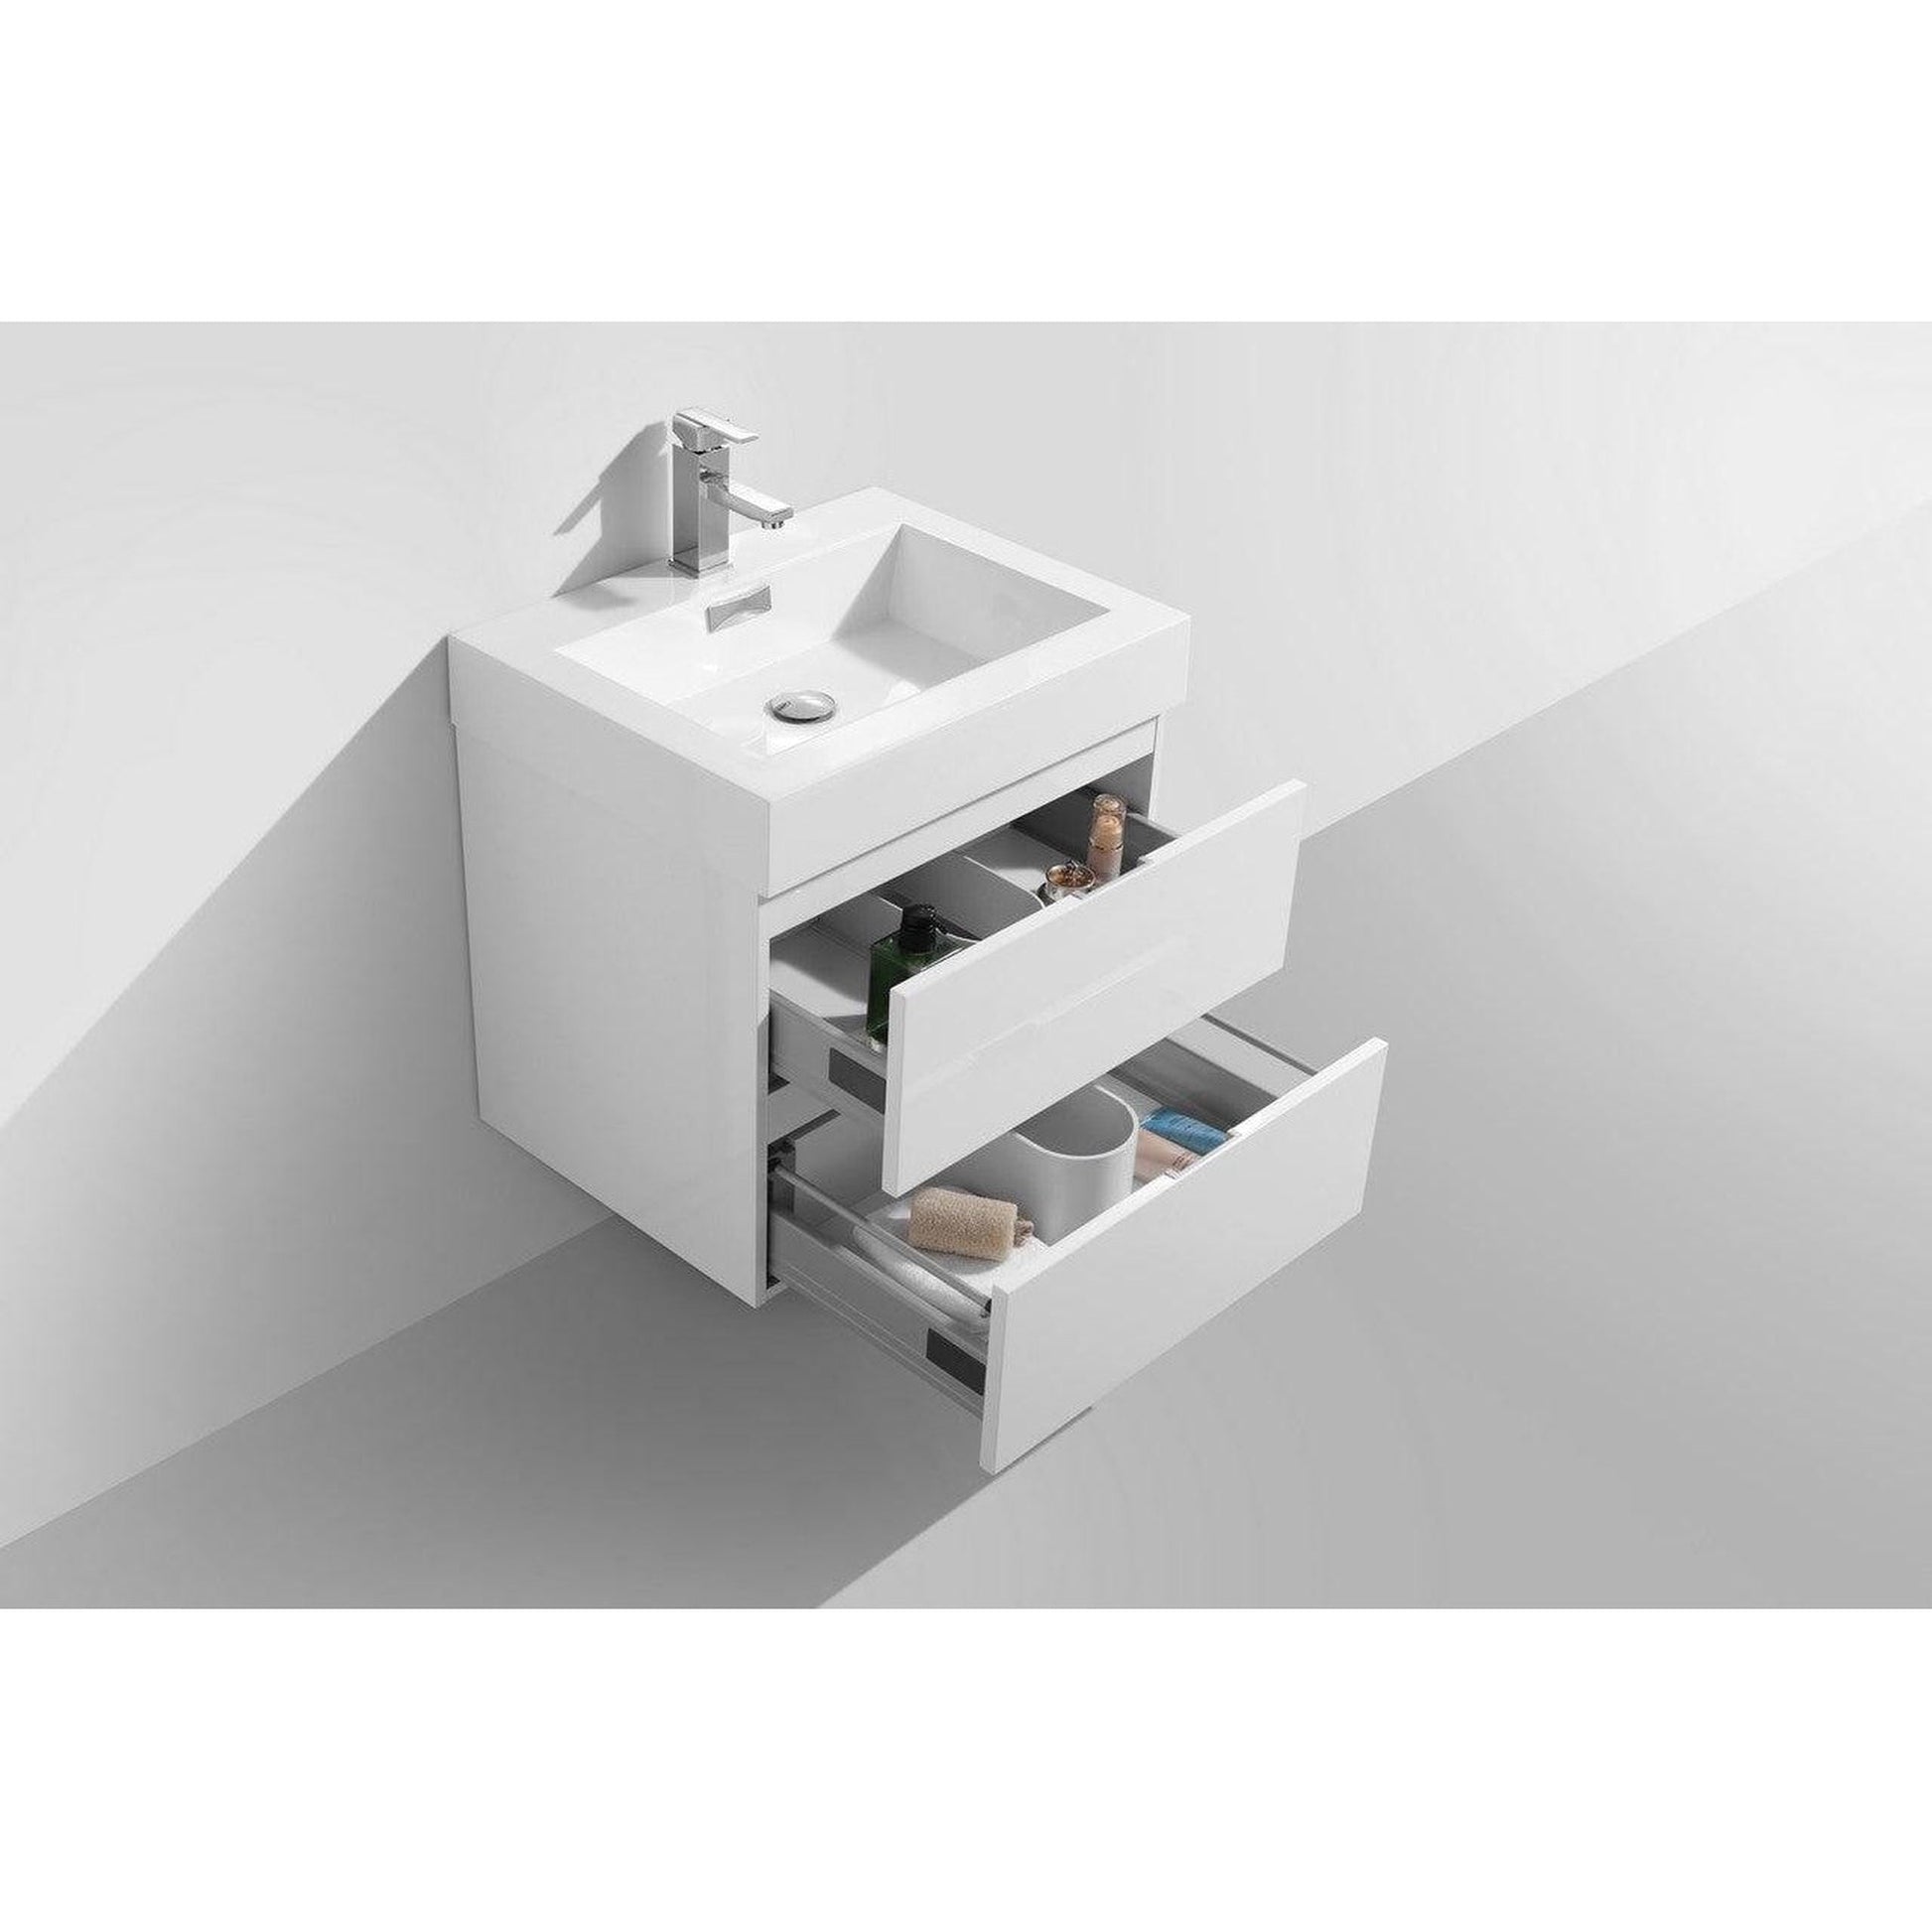 KubeBath Bliss 24" High Gloss White Wall-Mounted Modern Bathroom Vanity With Single Integrated Acrylic Sink With Overflow and 24" White Framed Mirror With Shelf